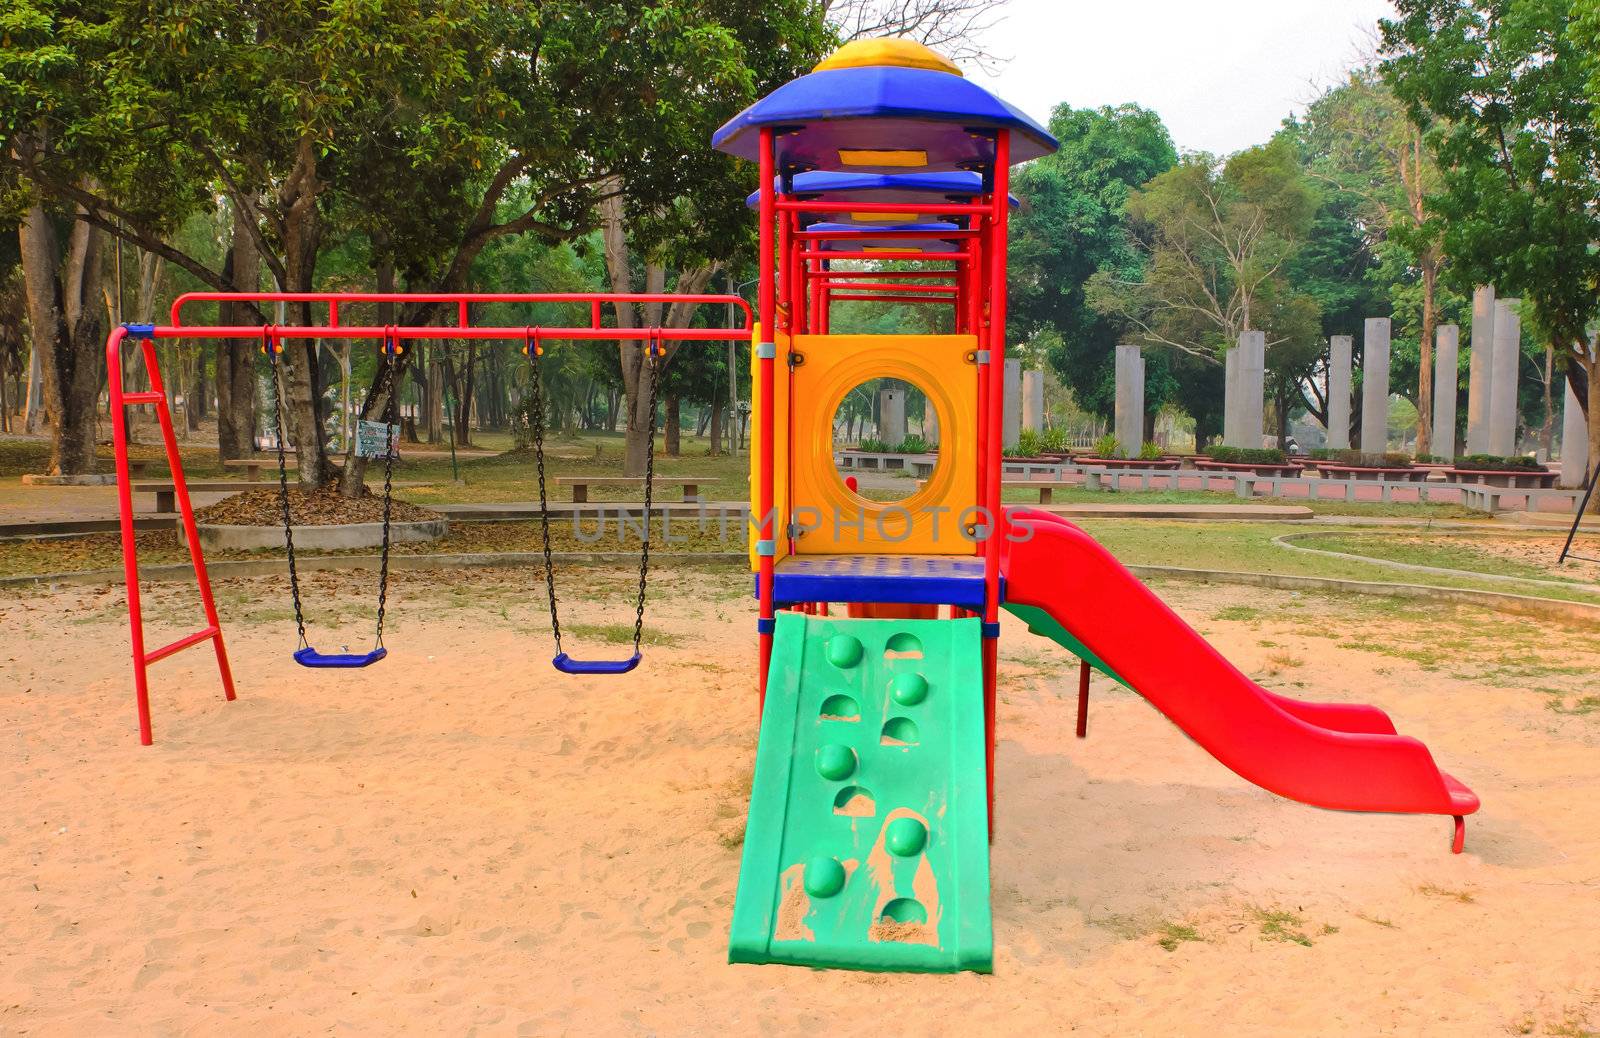 playground for children. Isolated on park